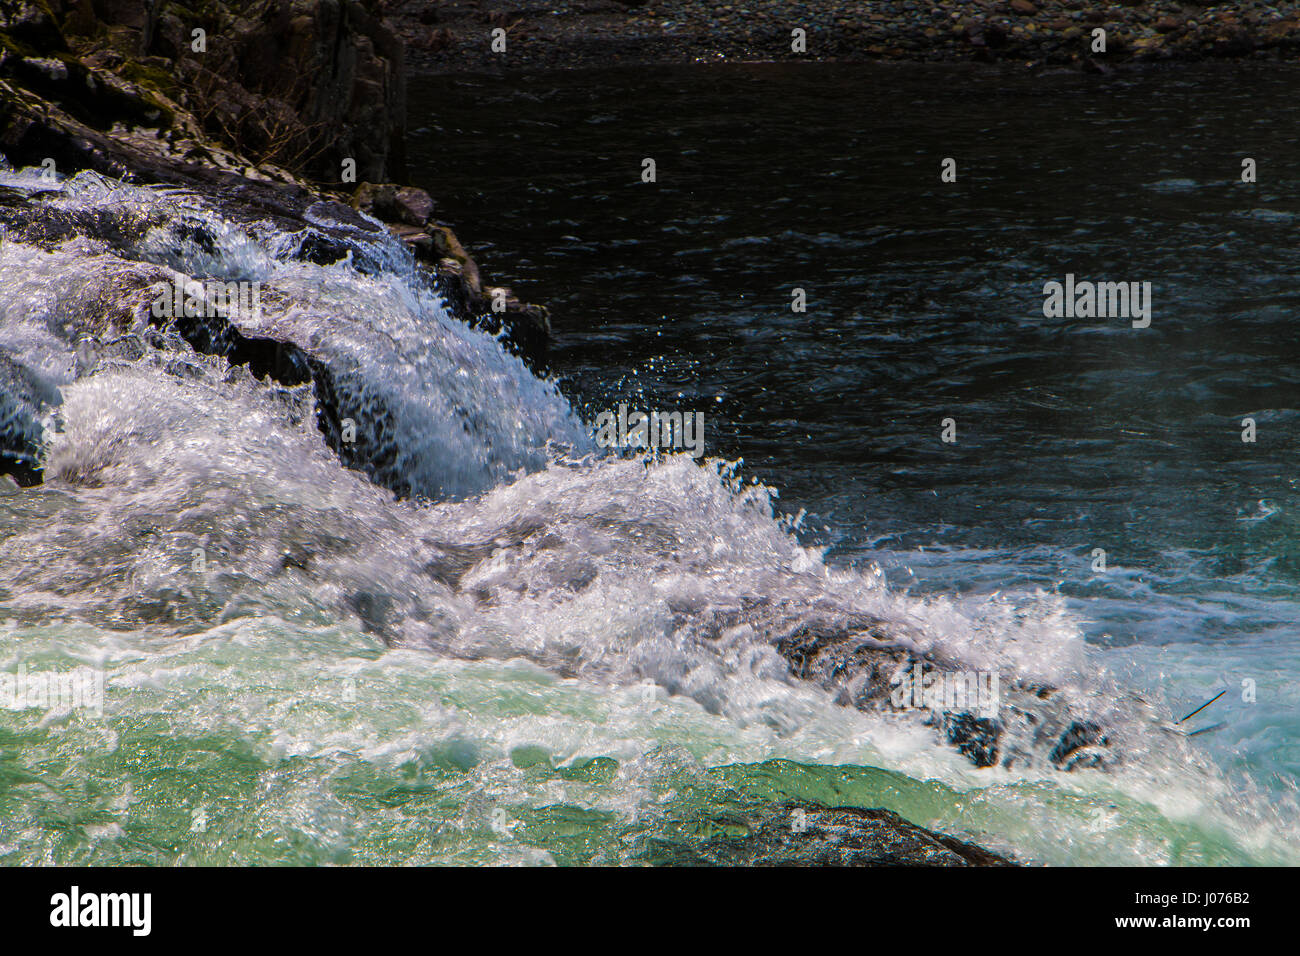 A freeze frame of water splashing over a slight fall in the river. Stock Photo